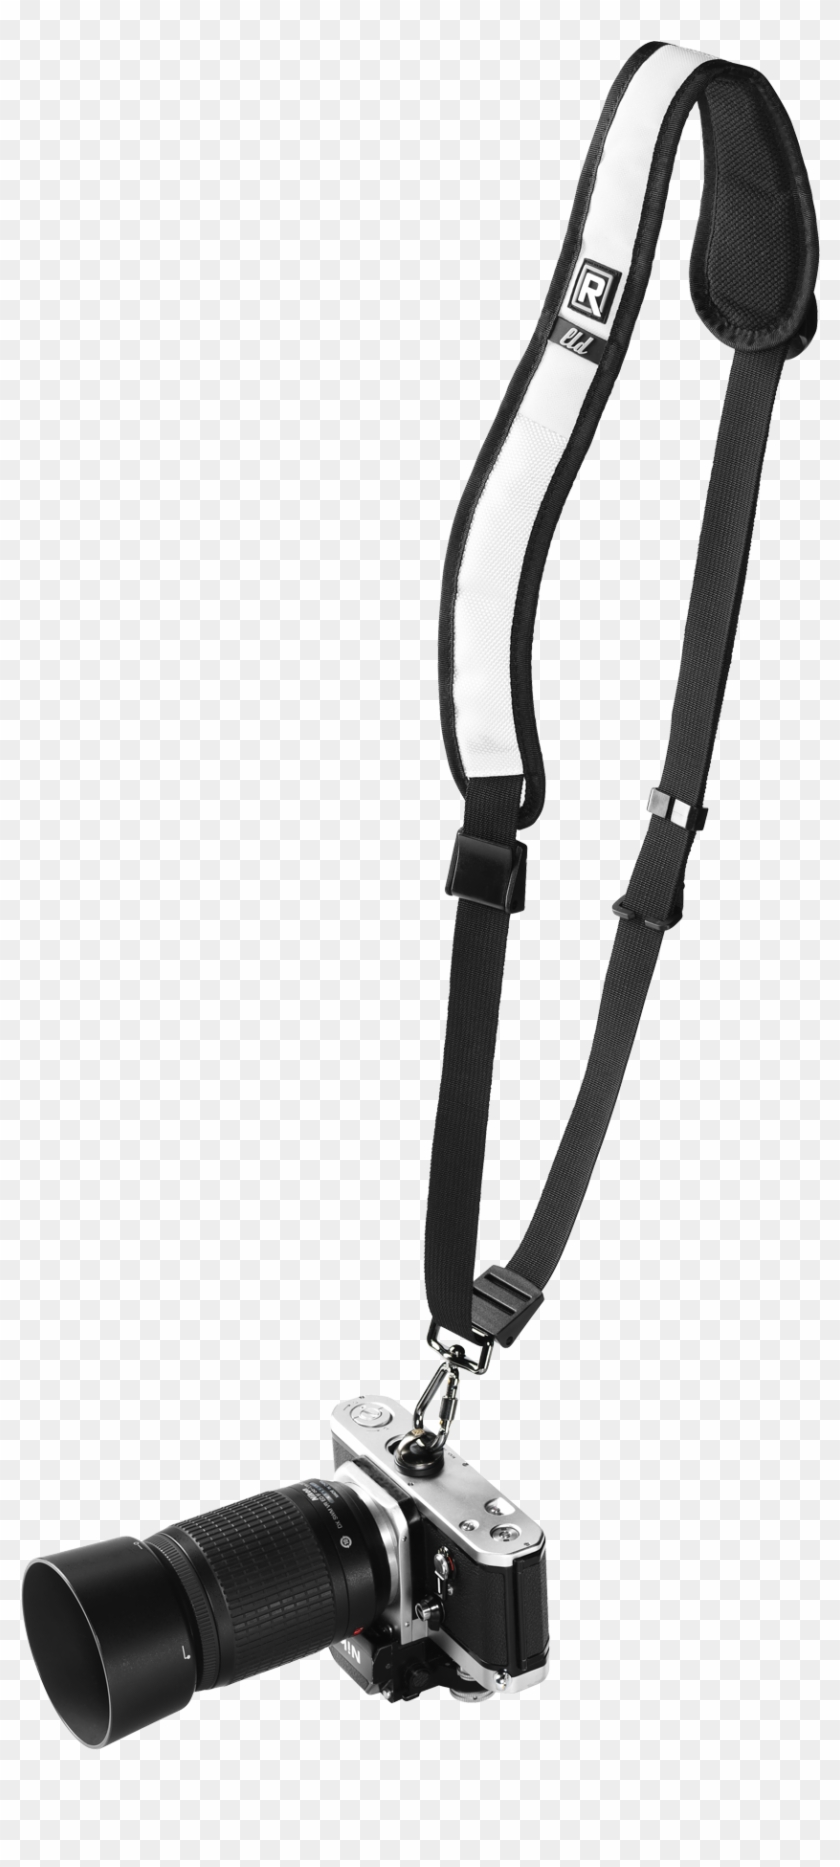 The Best Dslr Camera Strap Ever - Black Rapid Rs W1 Clipart #4598606